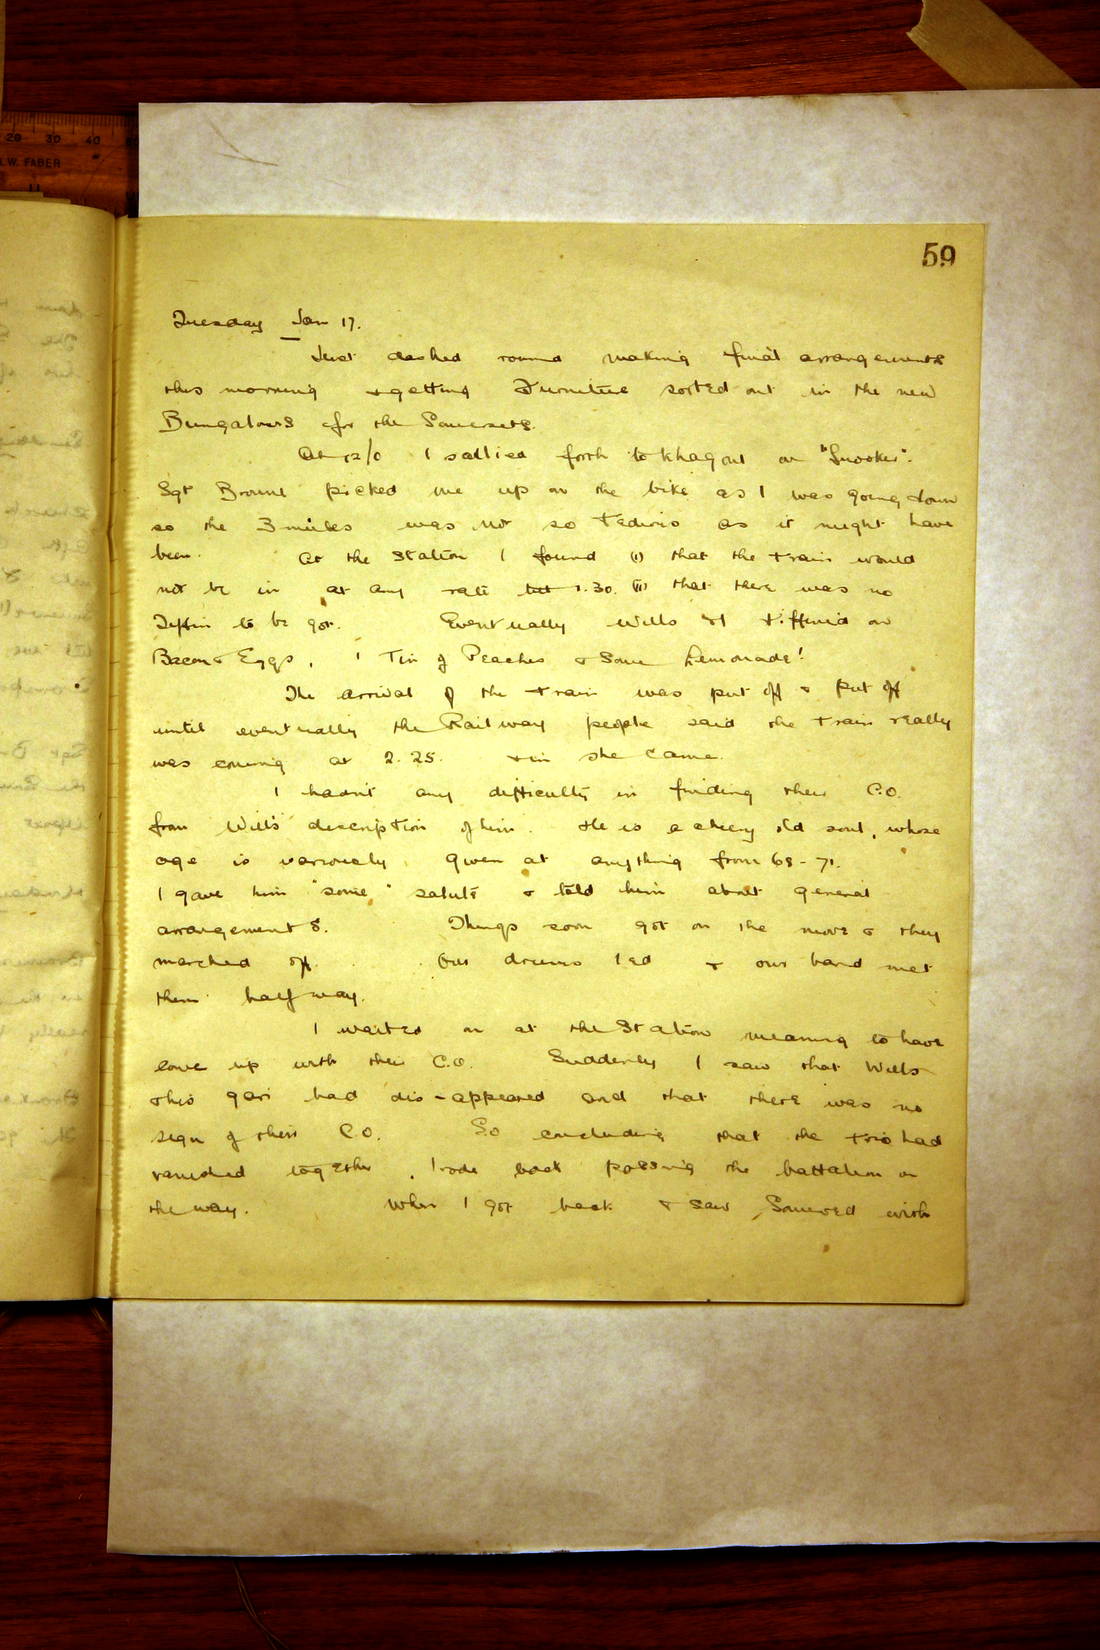 Scanned image of page book11 img_15043.jpg